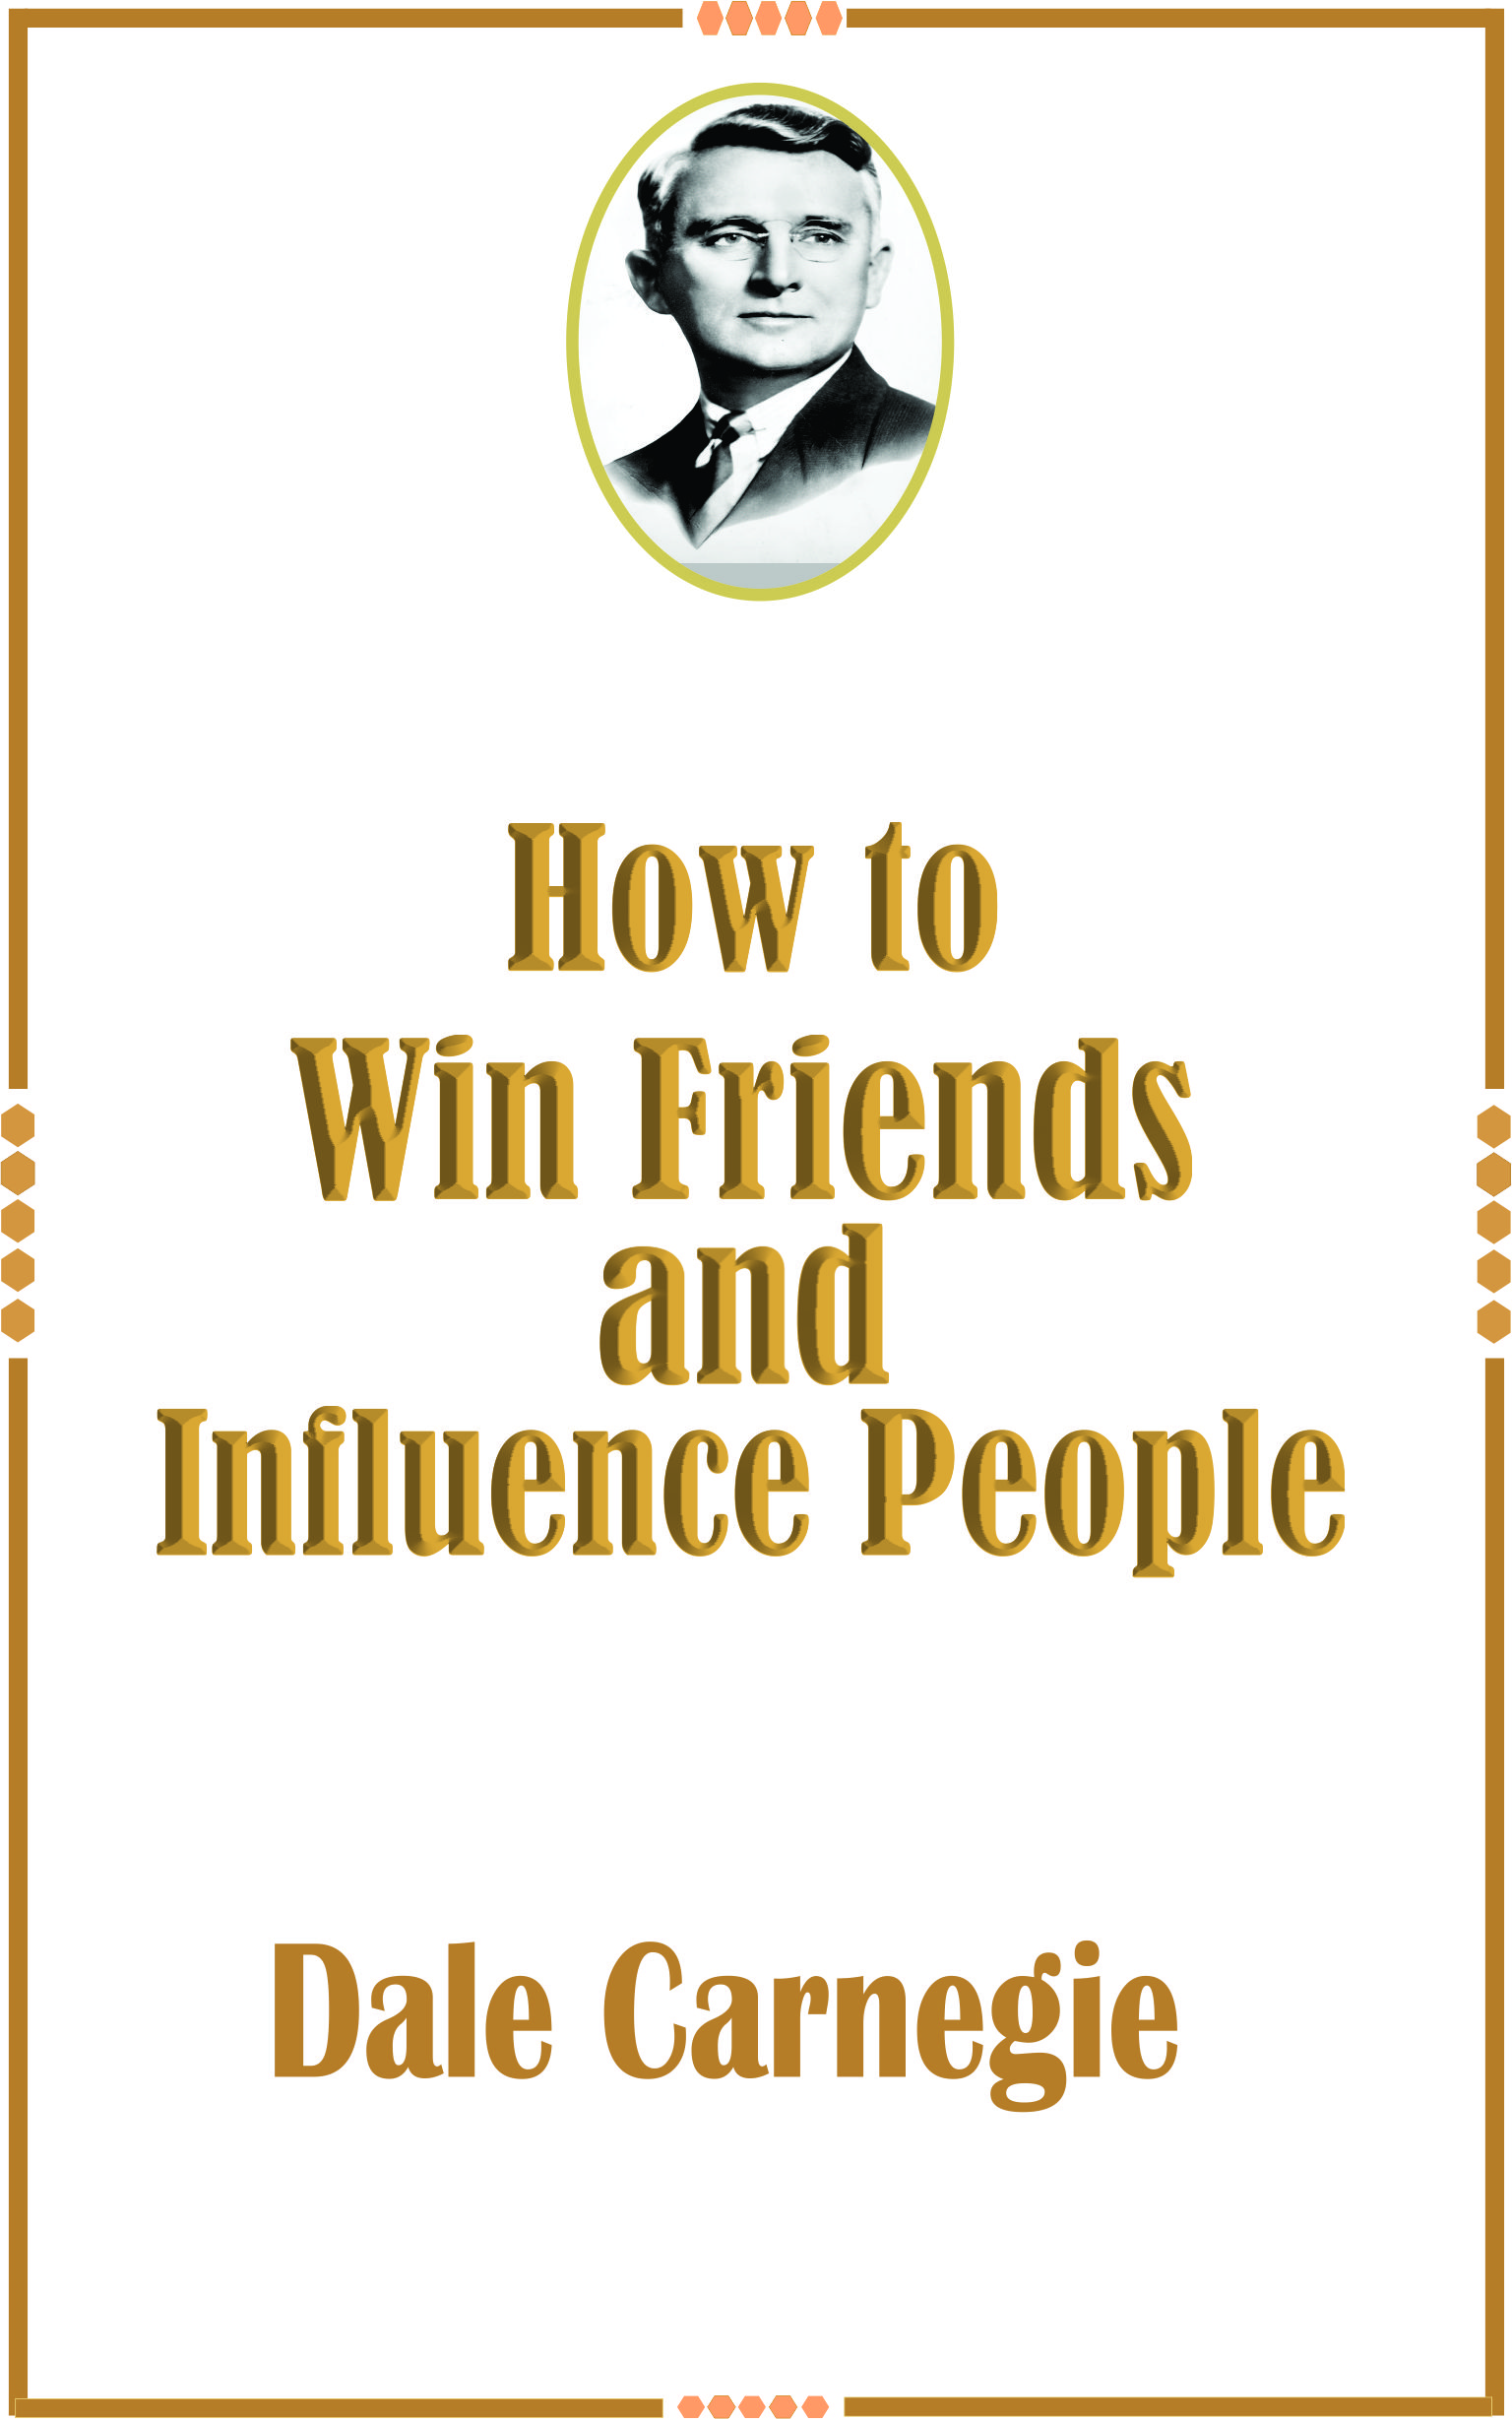 How To Win Friends & Influence People (Hardcover)